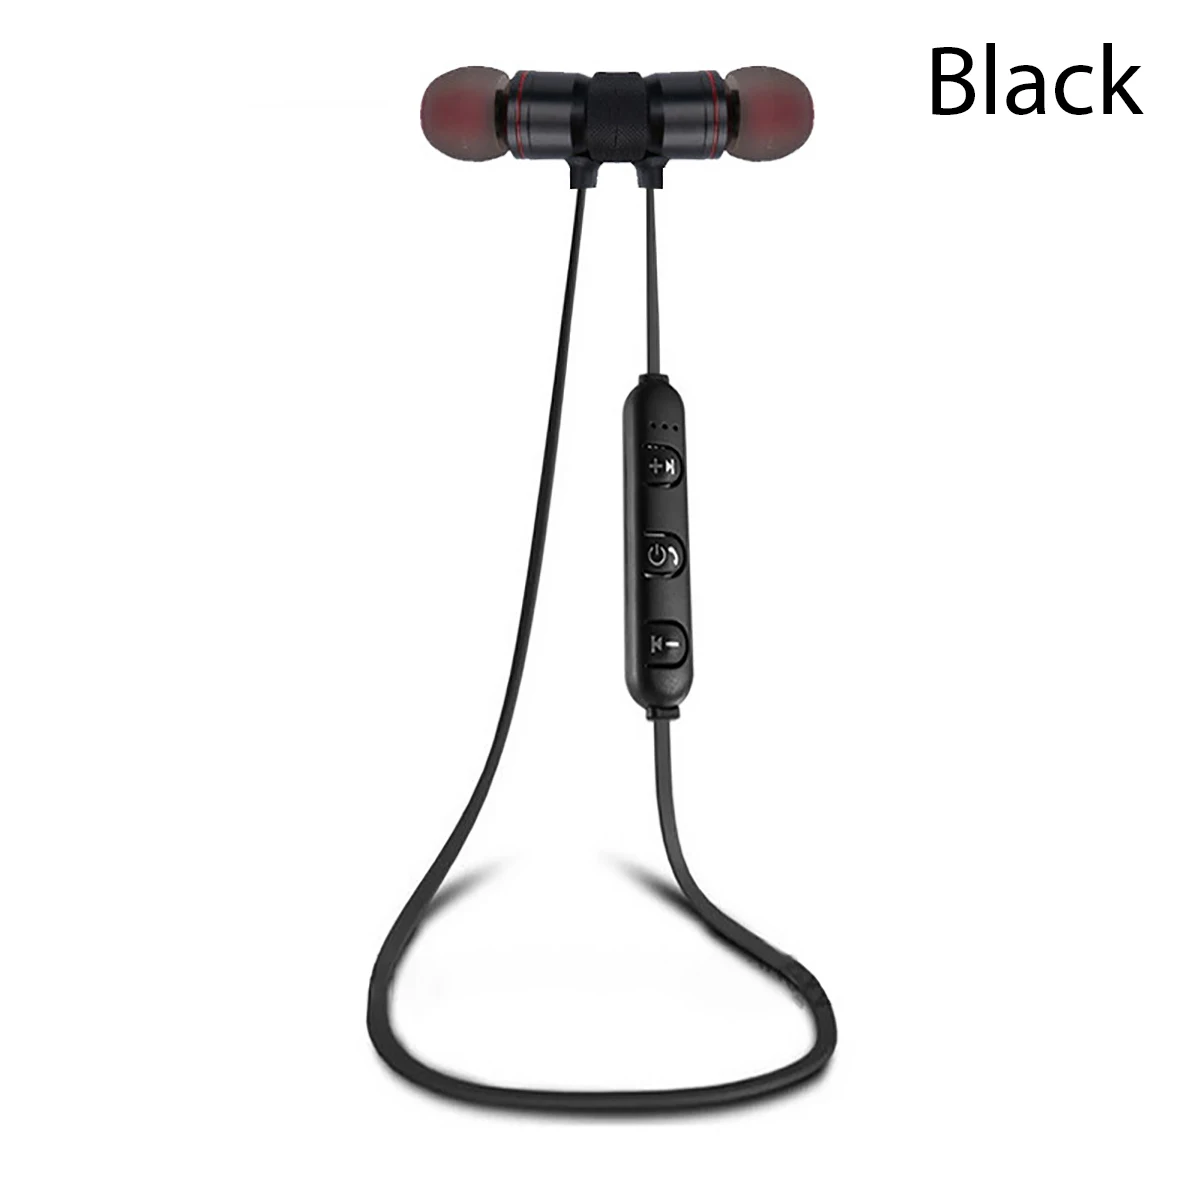 Wireless Bluetooth Earphones Metal Magnetic Stereo sports Bass Cordless Headset Earbuds With Microphone headphones for all phone - Color: Black